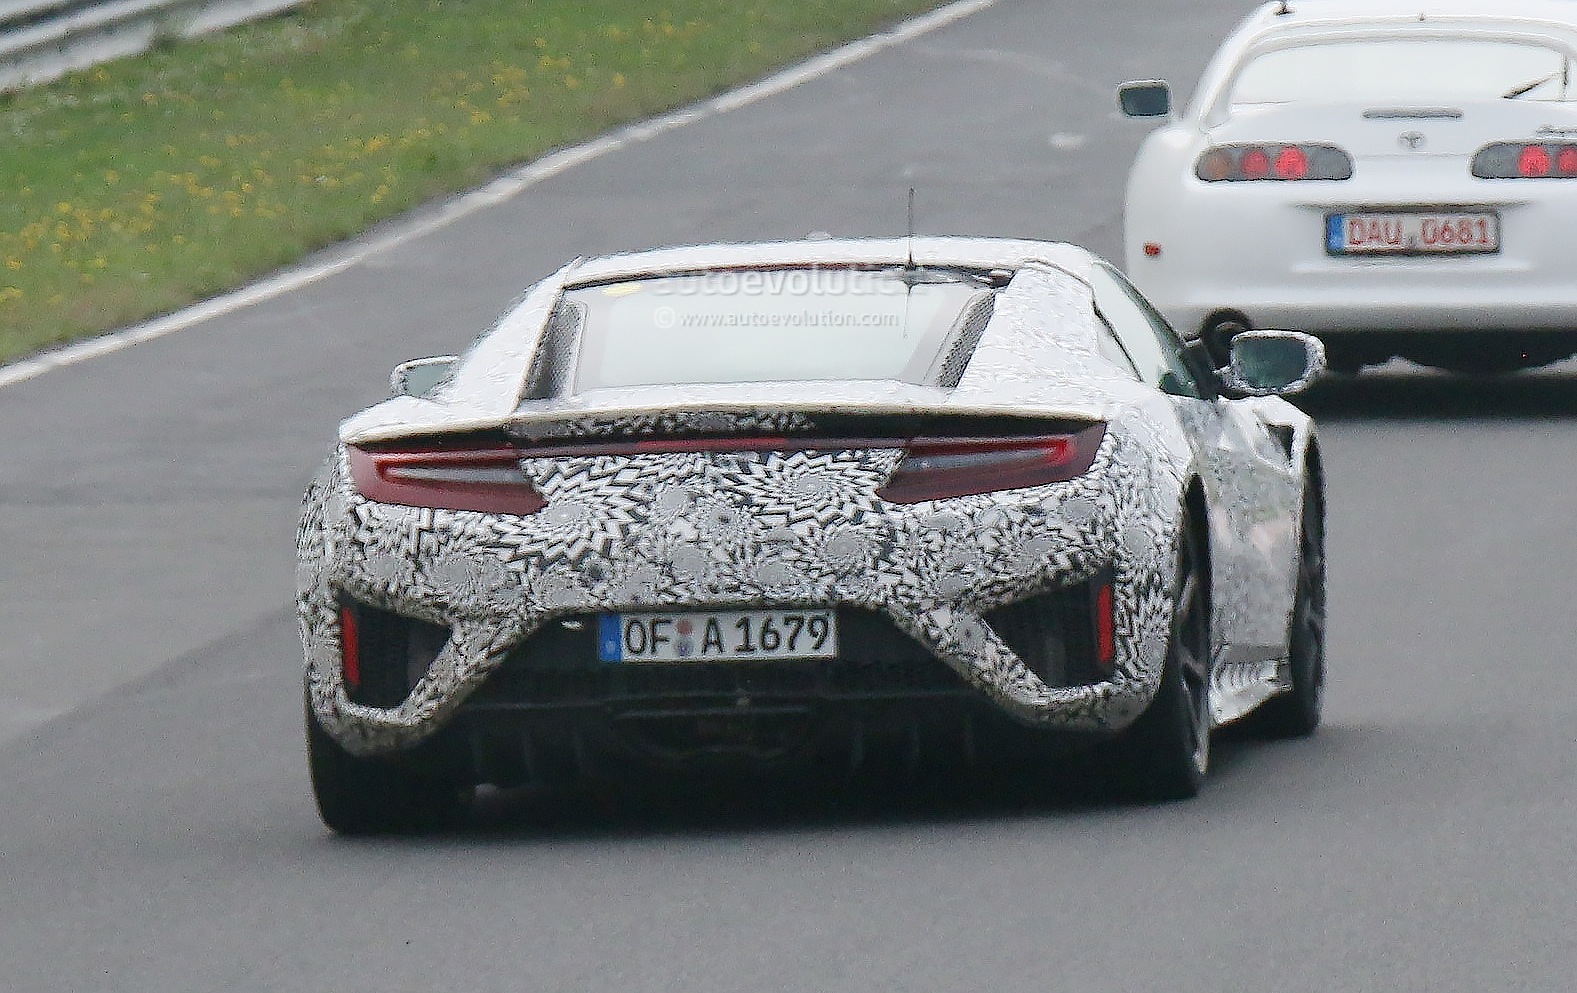 production-2015-acura-nsx-spied-during-nurburgring-testing-photo-gallery_8.jpg